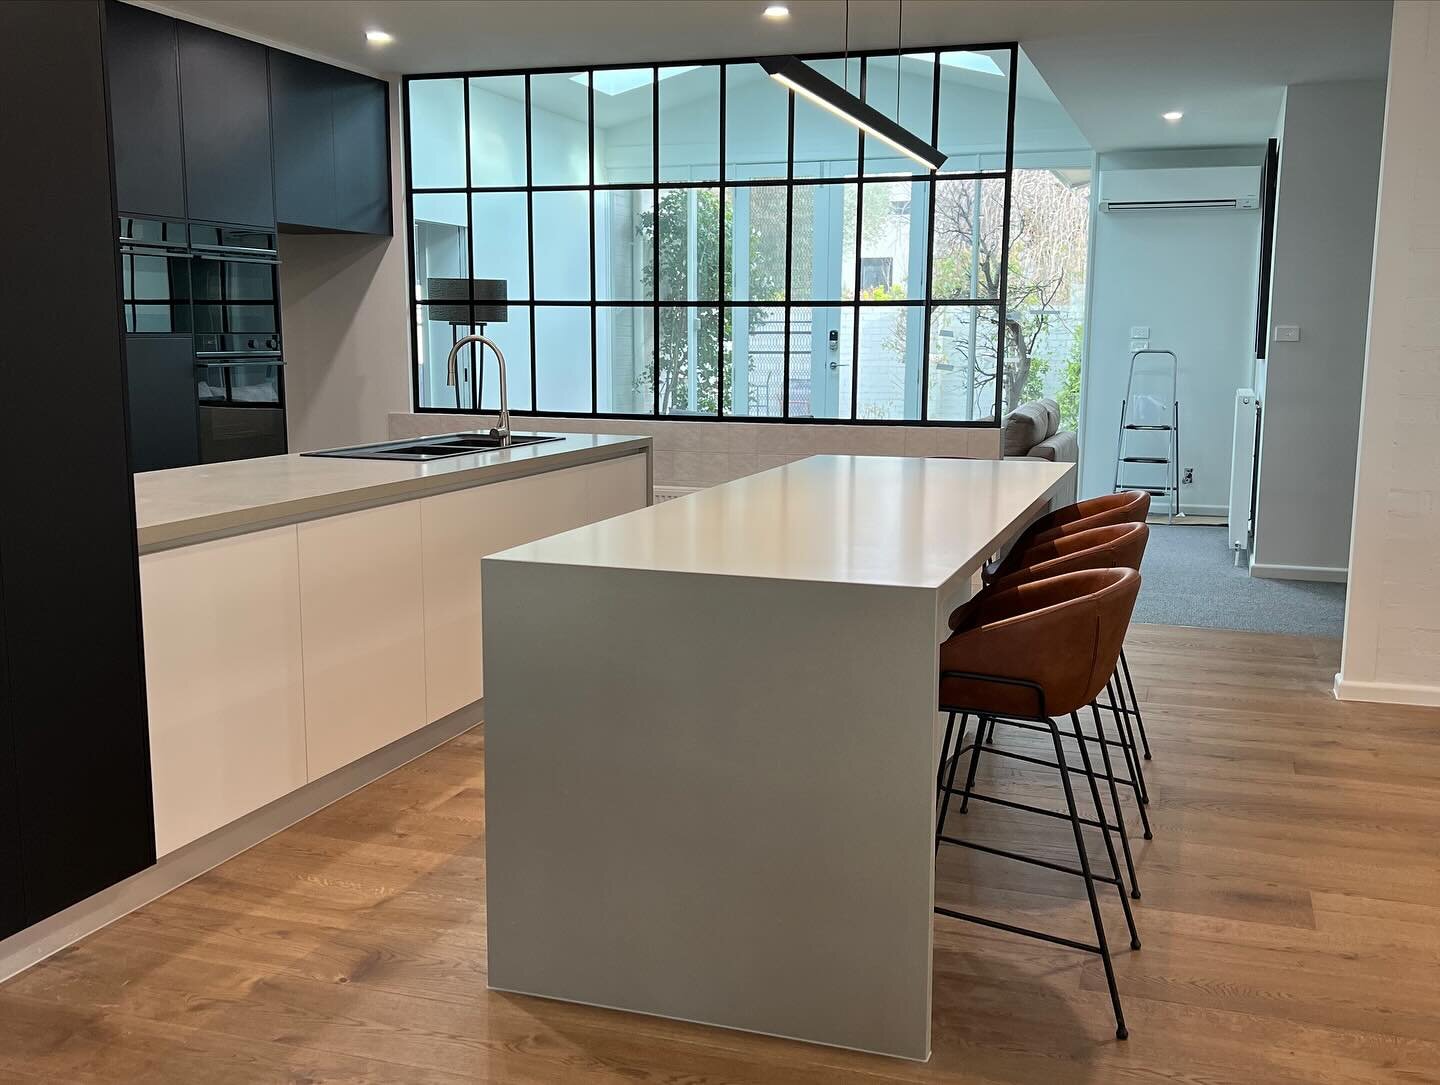 We have worked alongside Darren Casey to help deliver this elegant kitchen and study renovation which offers views over Lake Wendouree, Ballarat. This open and spacious area features Quantum Quartz benchtops, paired with light ceramic splashback tile